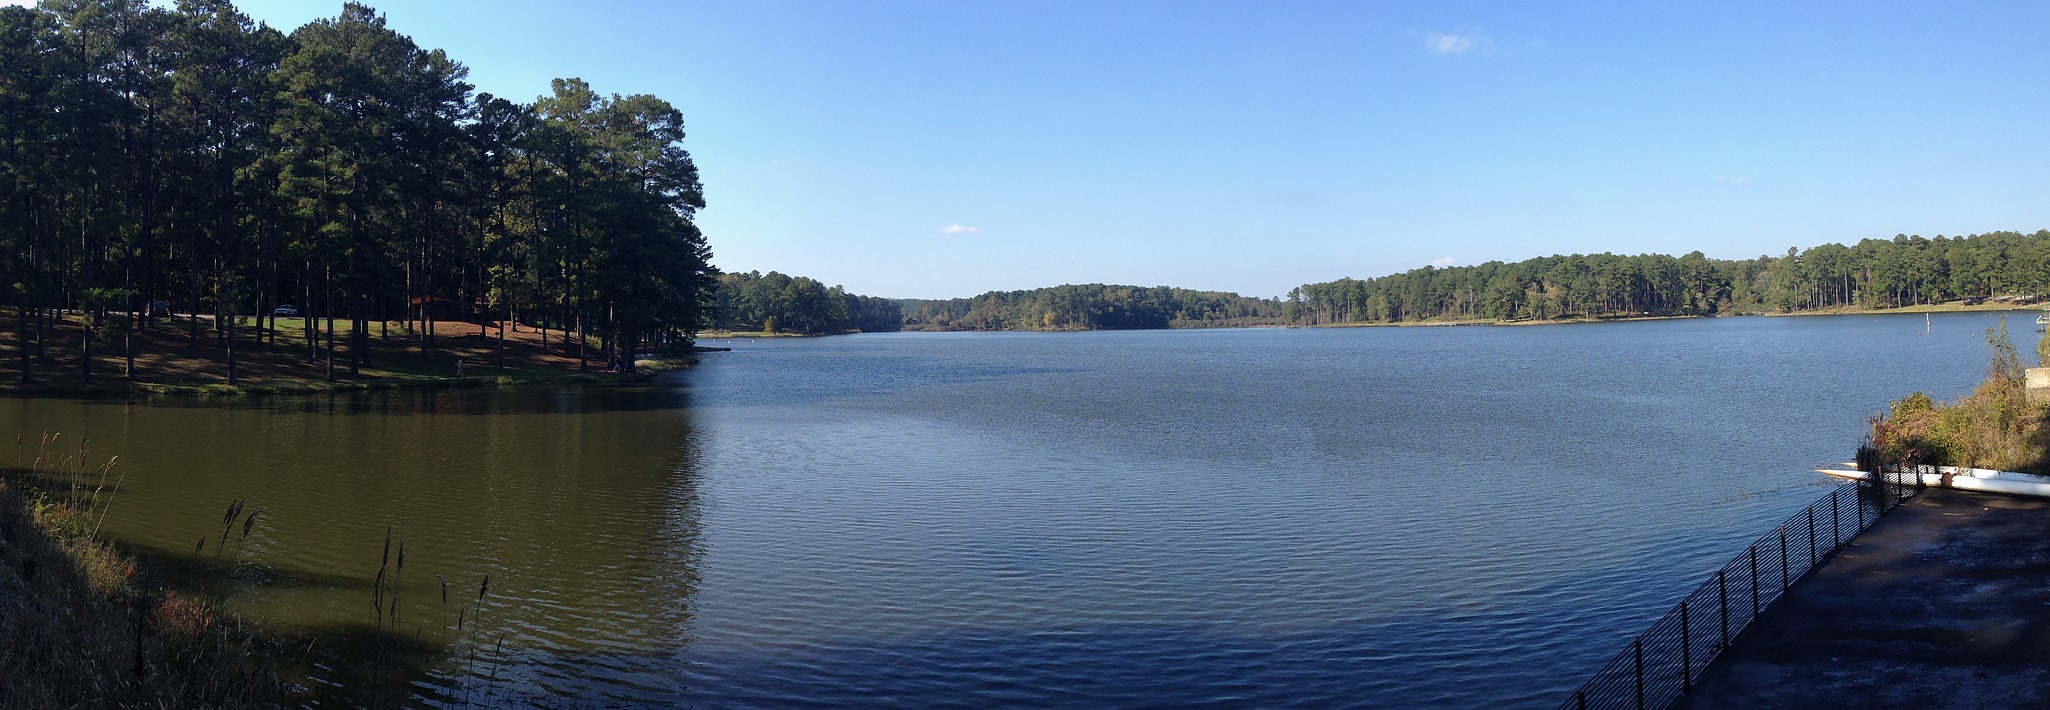 Tombigbee National Forest, Stany Zjednoczone